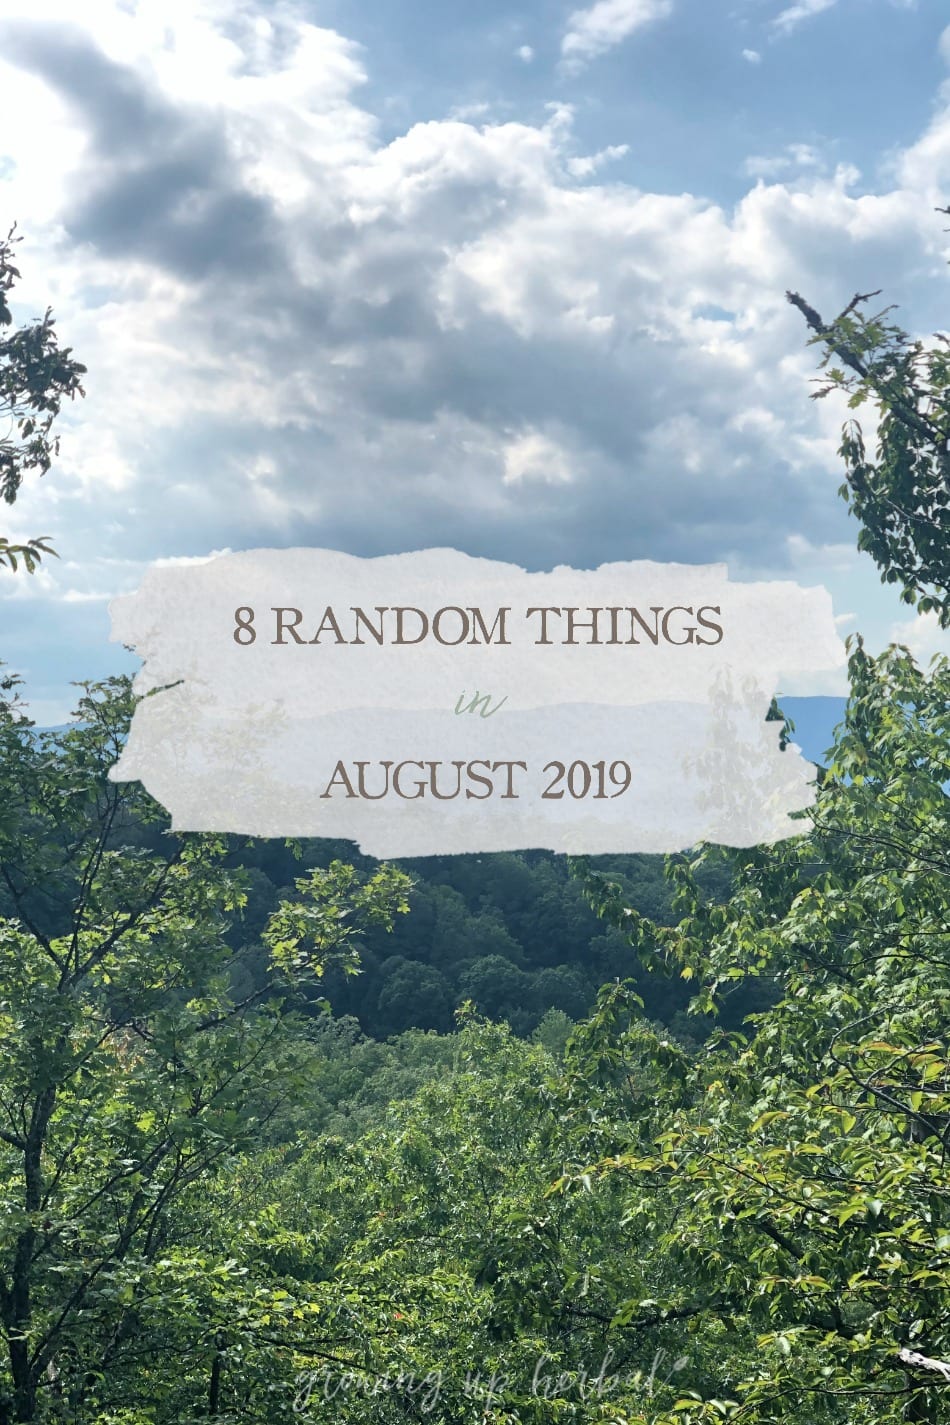 8 Random Things in August 2019 | Growing Up Herbal | It’s been a while since I’ve shared some random thoughts with you so here are 8 of them from August of 2019!